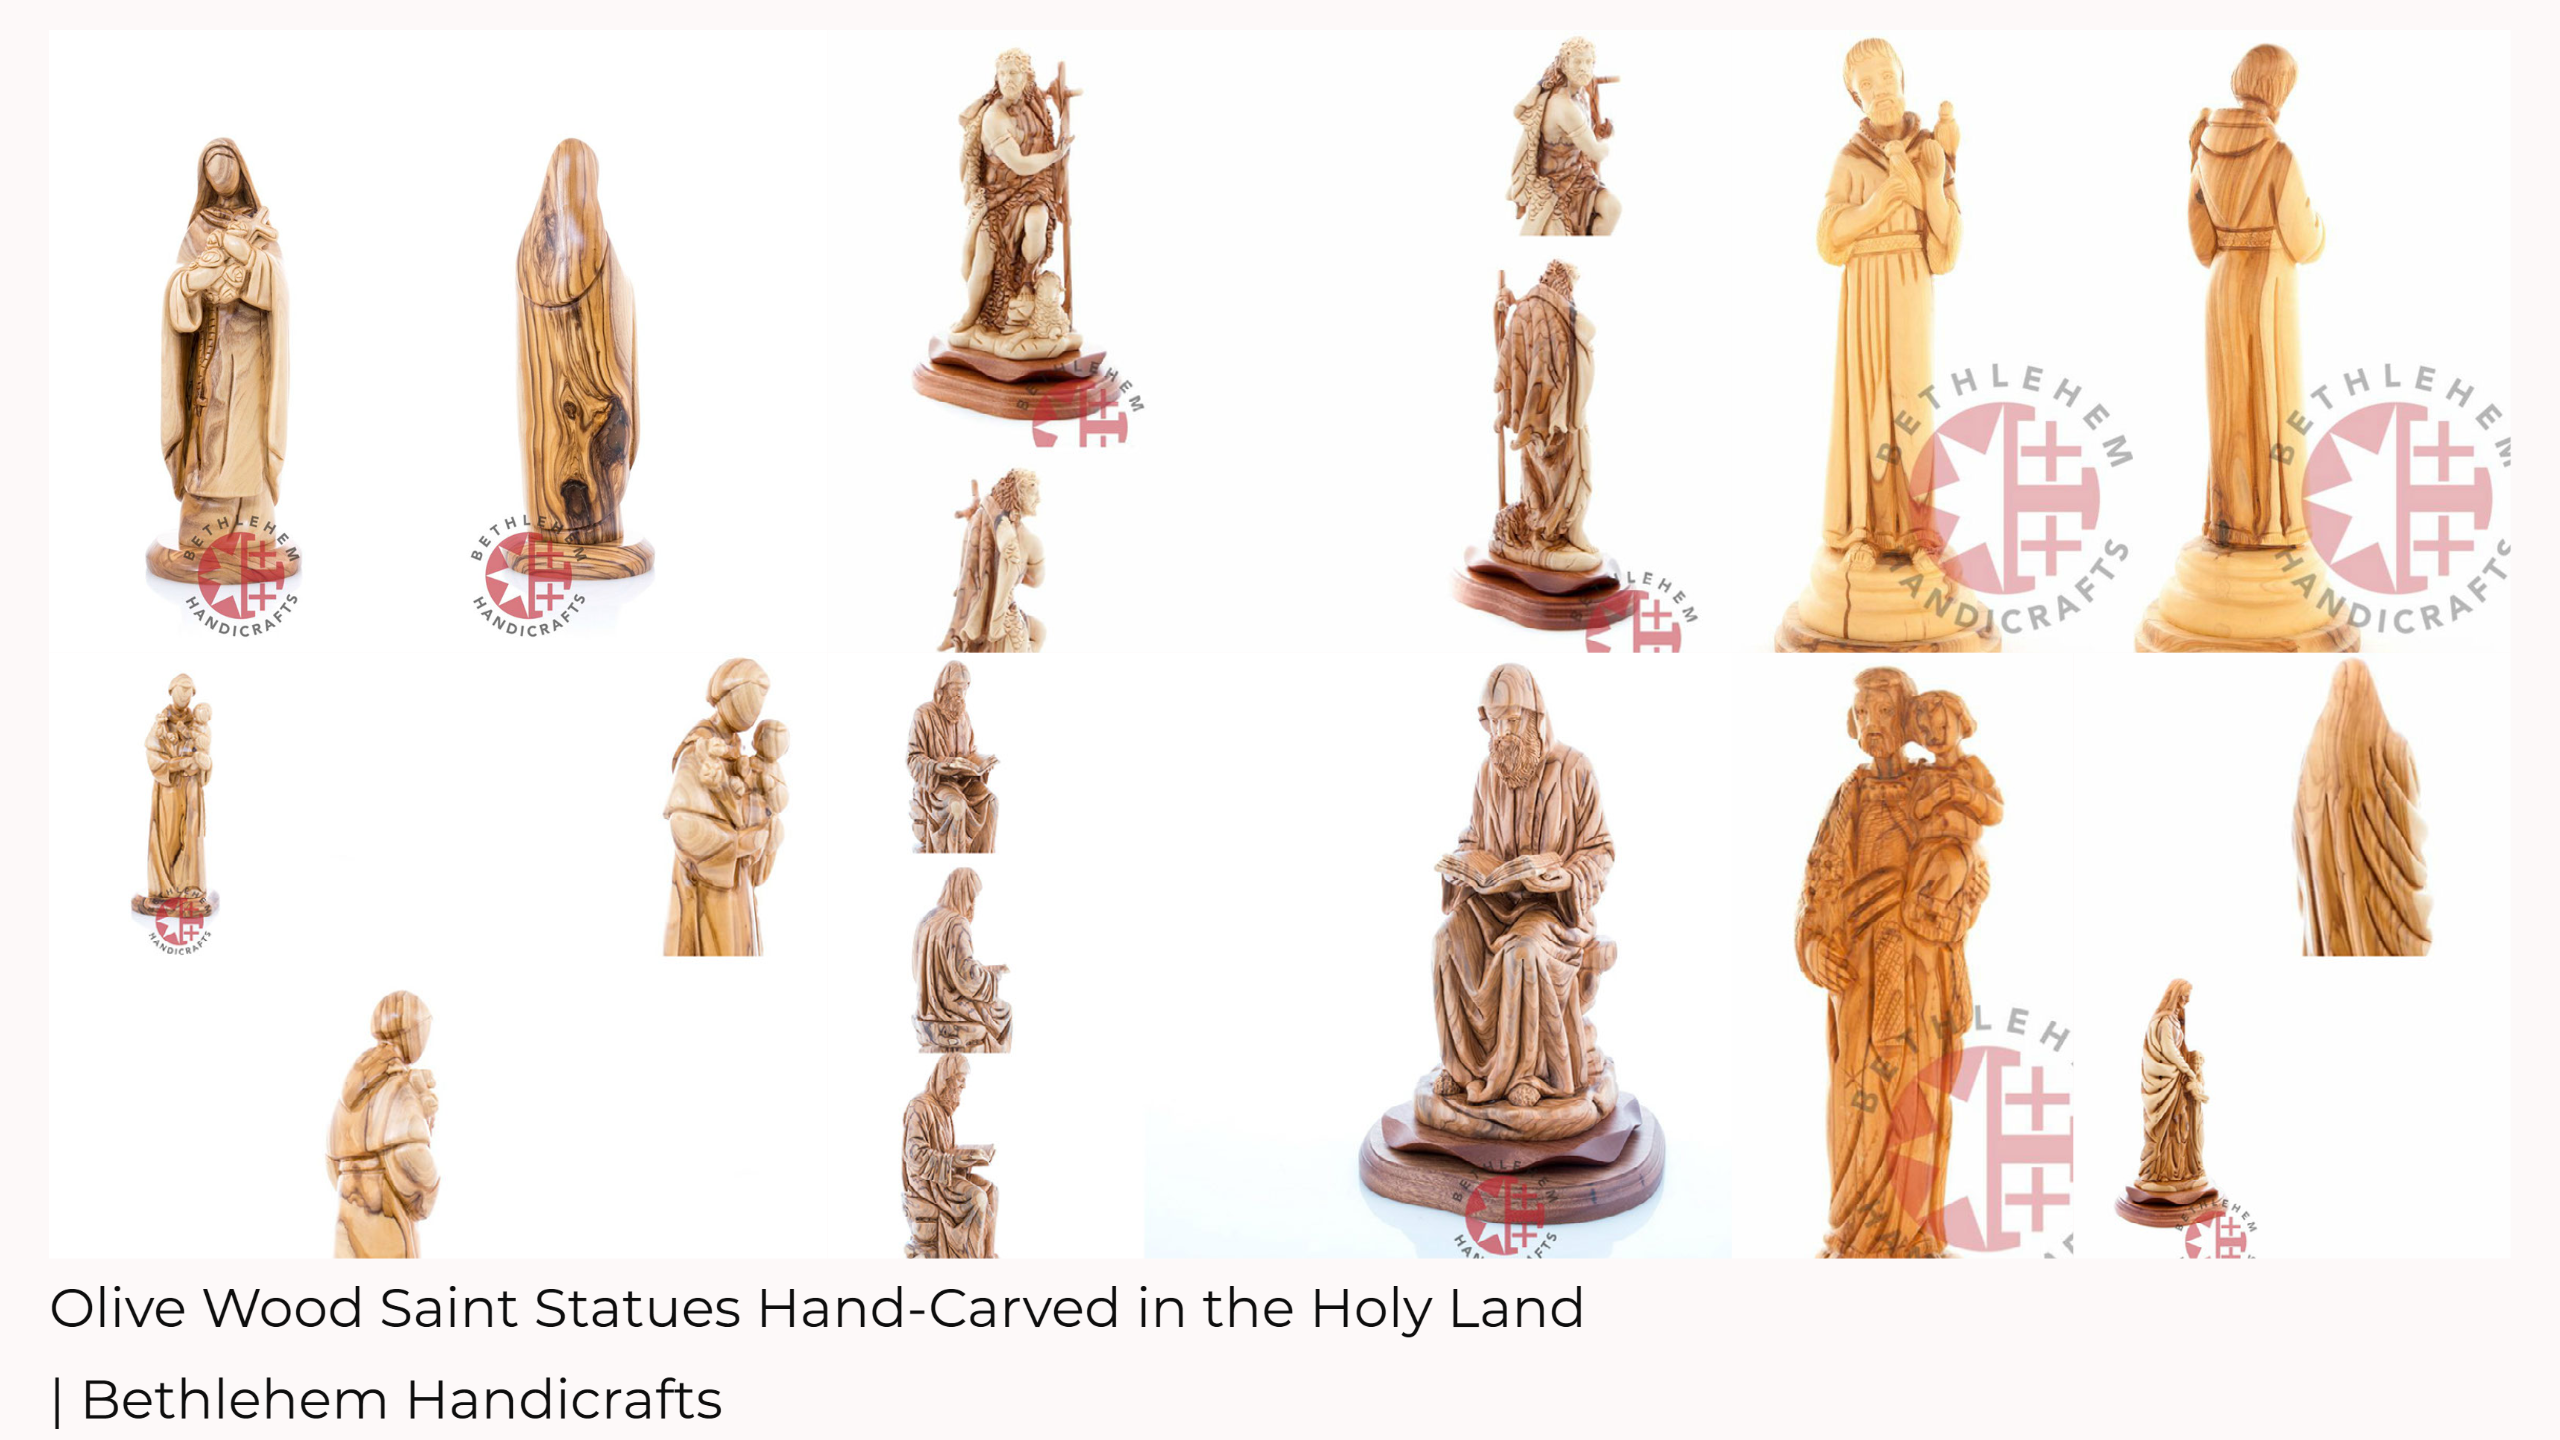 Olive Wood Saint Statues Hand-Carved in the Holy Land | Bethlehem Handicrafts